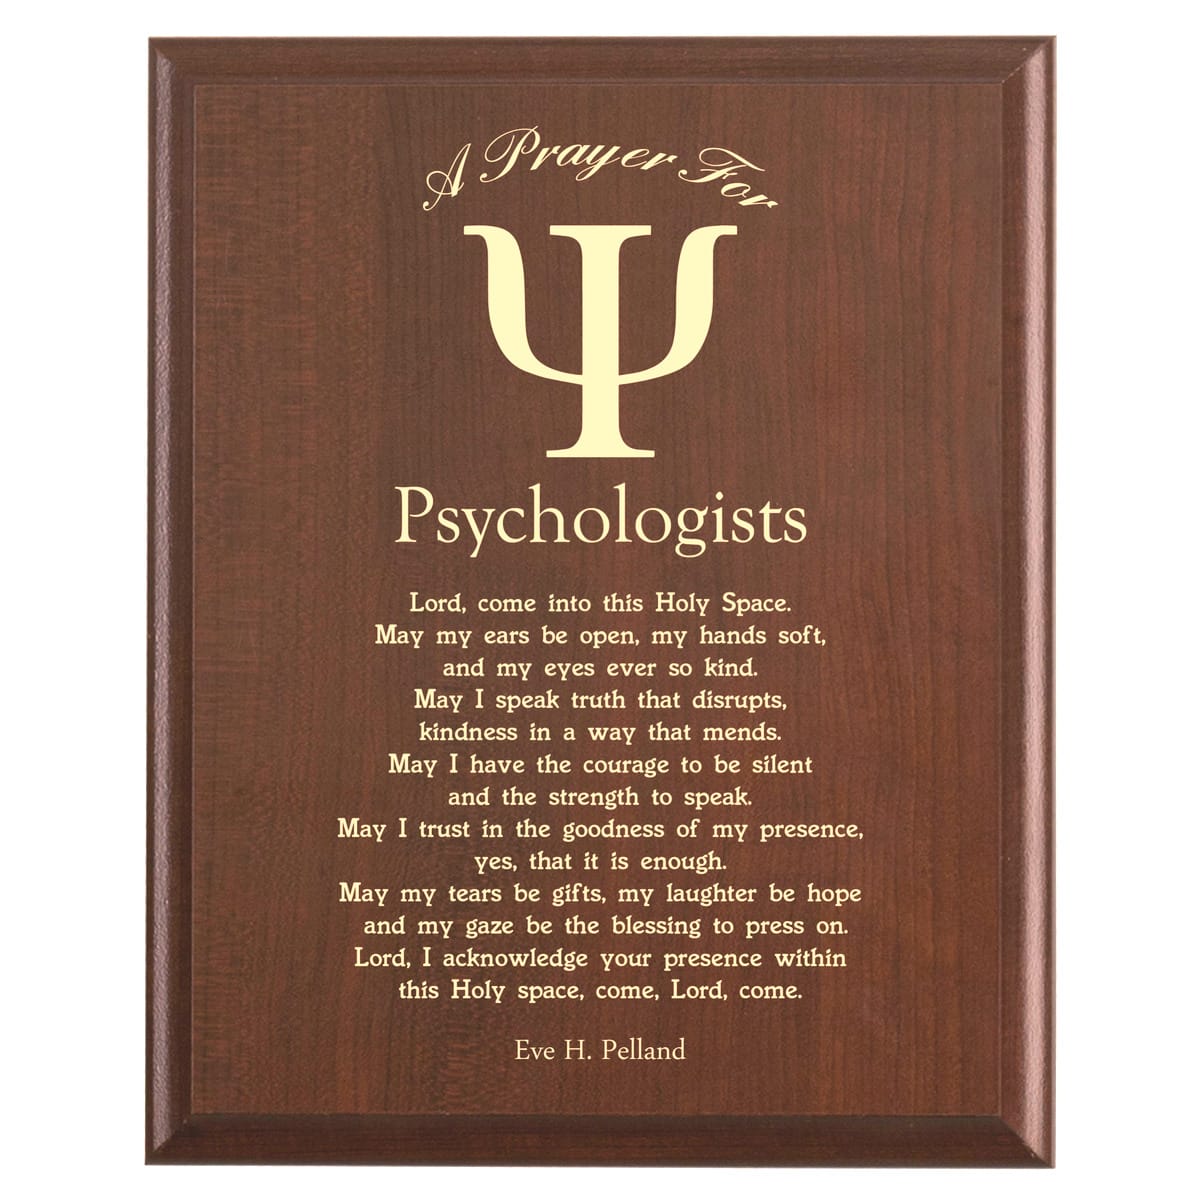 Plaque photo: Psychologist Prayer Plaque design with free personalization. Wood style finish with customized text.